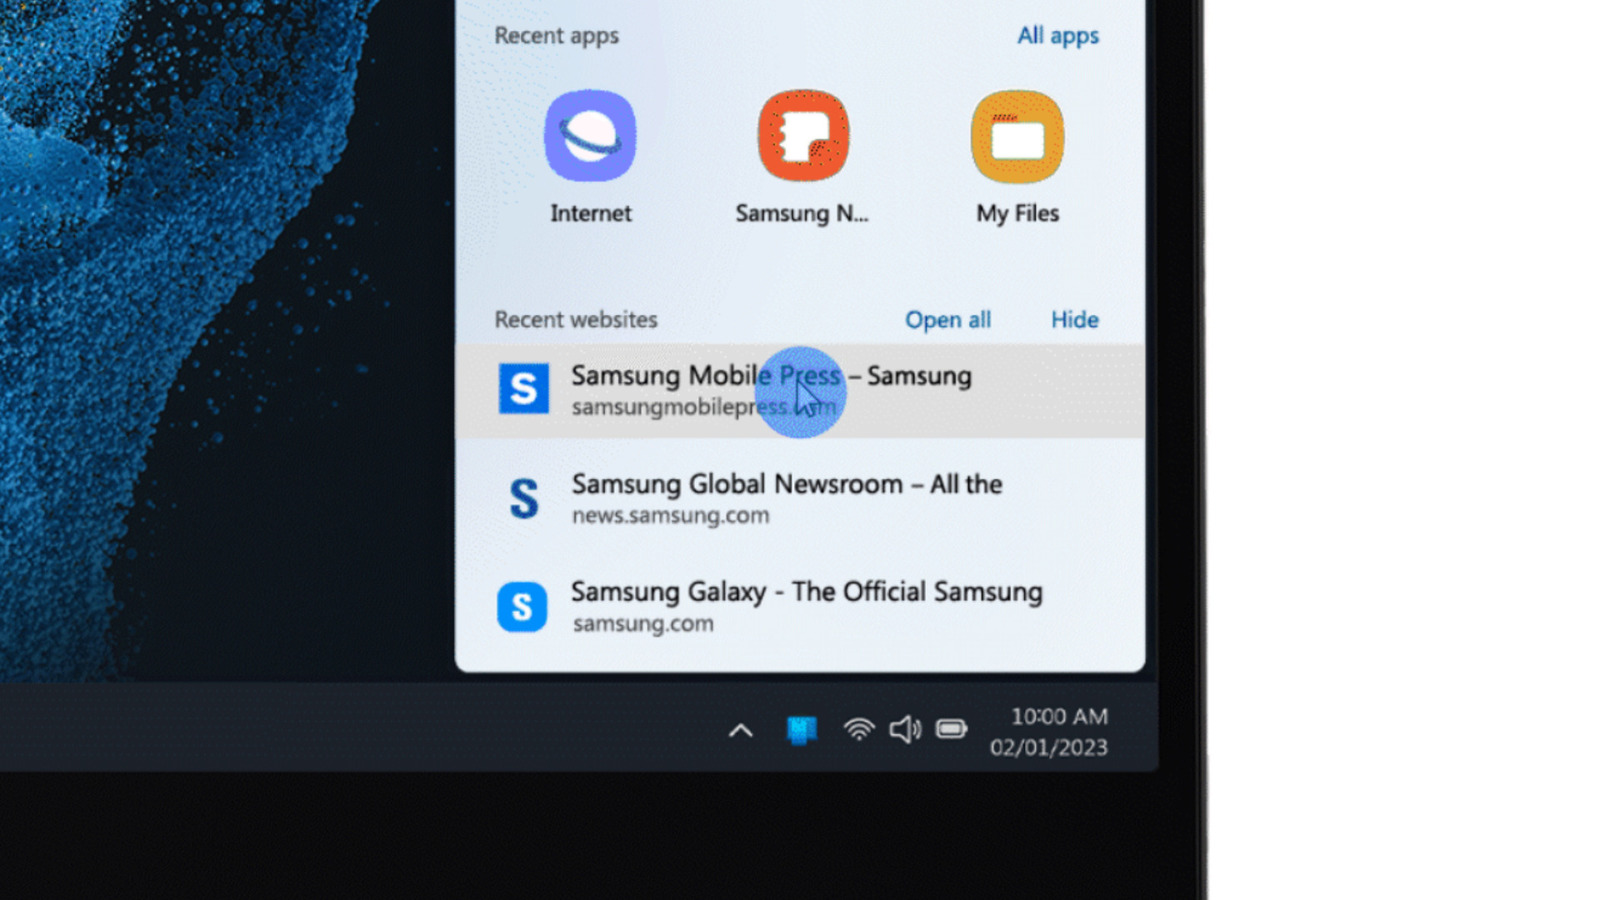 How To Use The Recent Websites Feature On Samsung Galaxy Phones – SlashGear